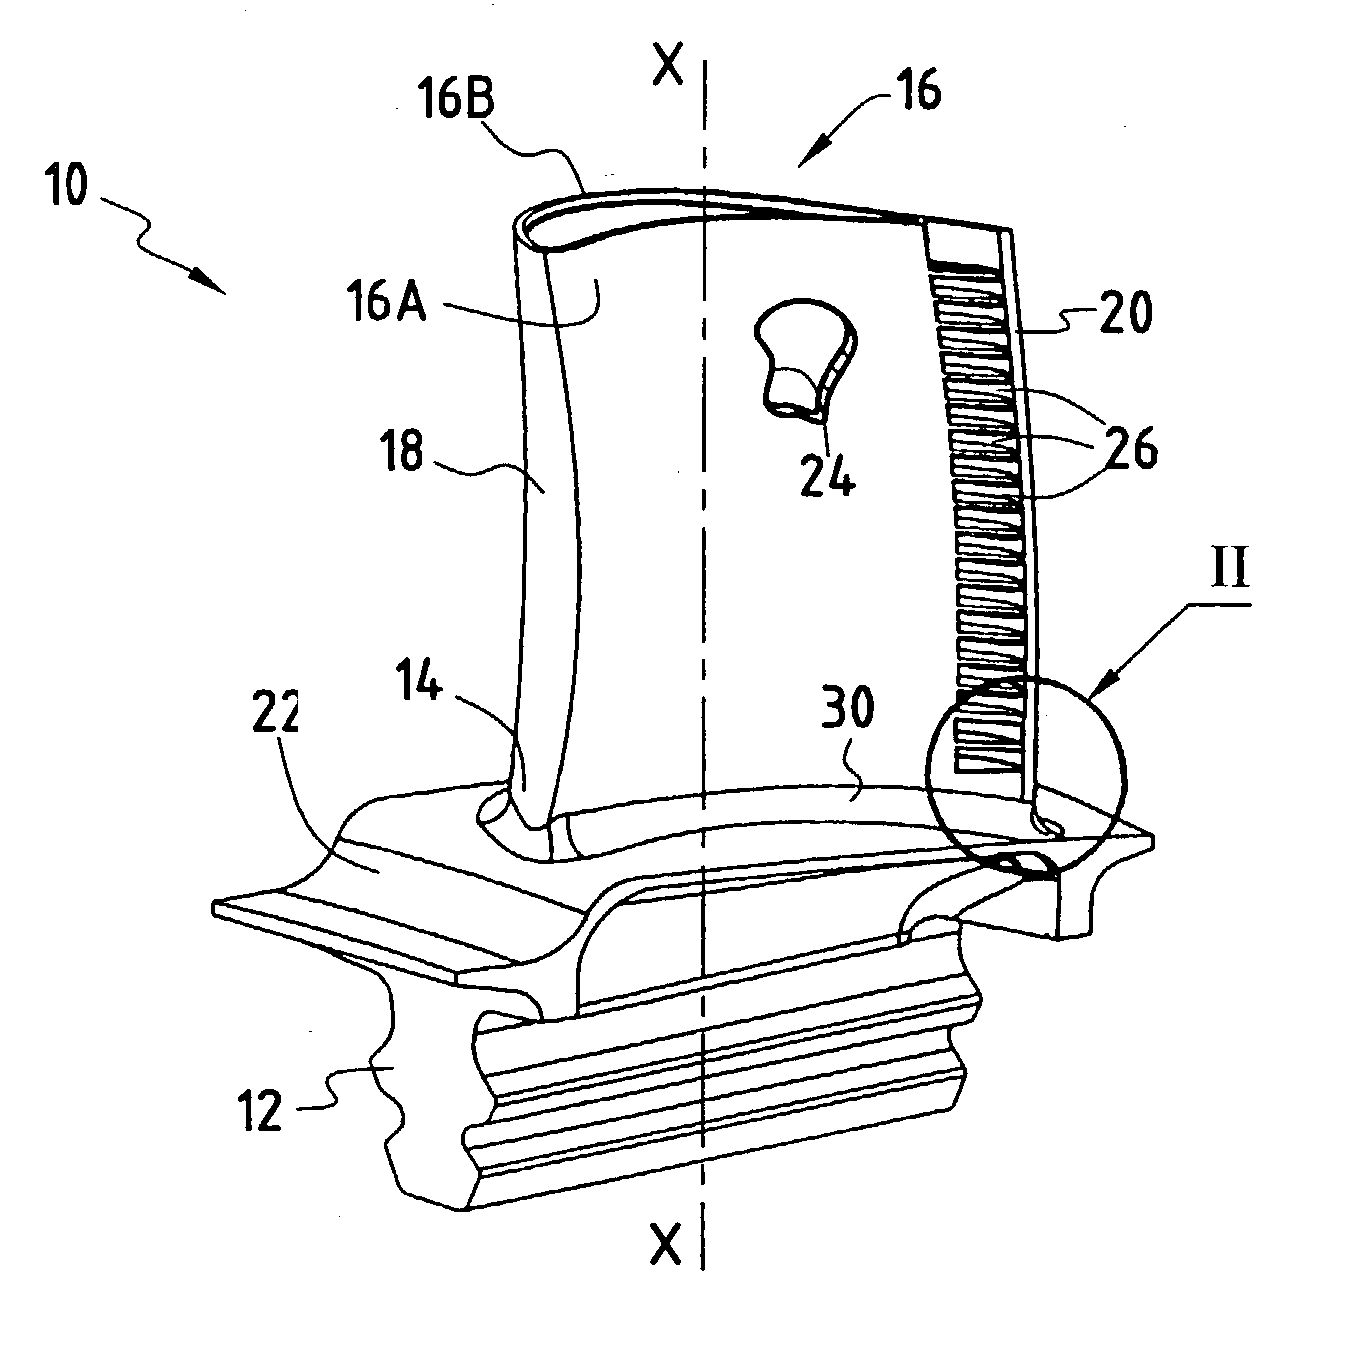 Moving blade for a high pressure turbine, the blade having a trailing edge of improved thermal behavior